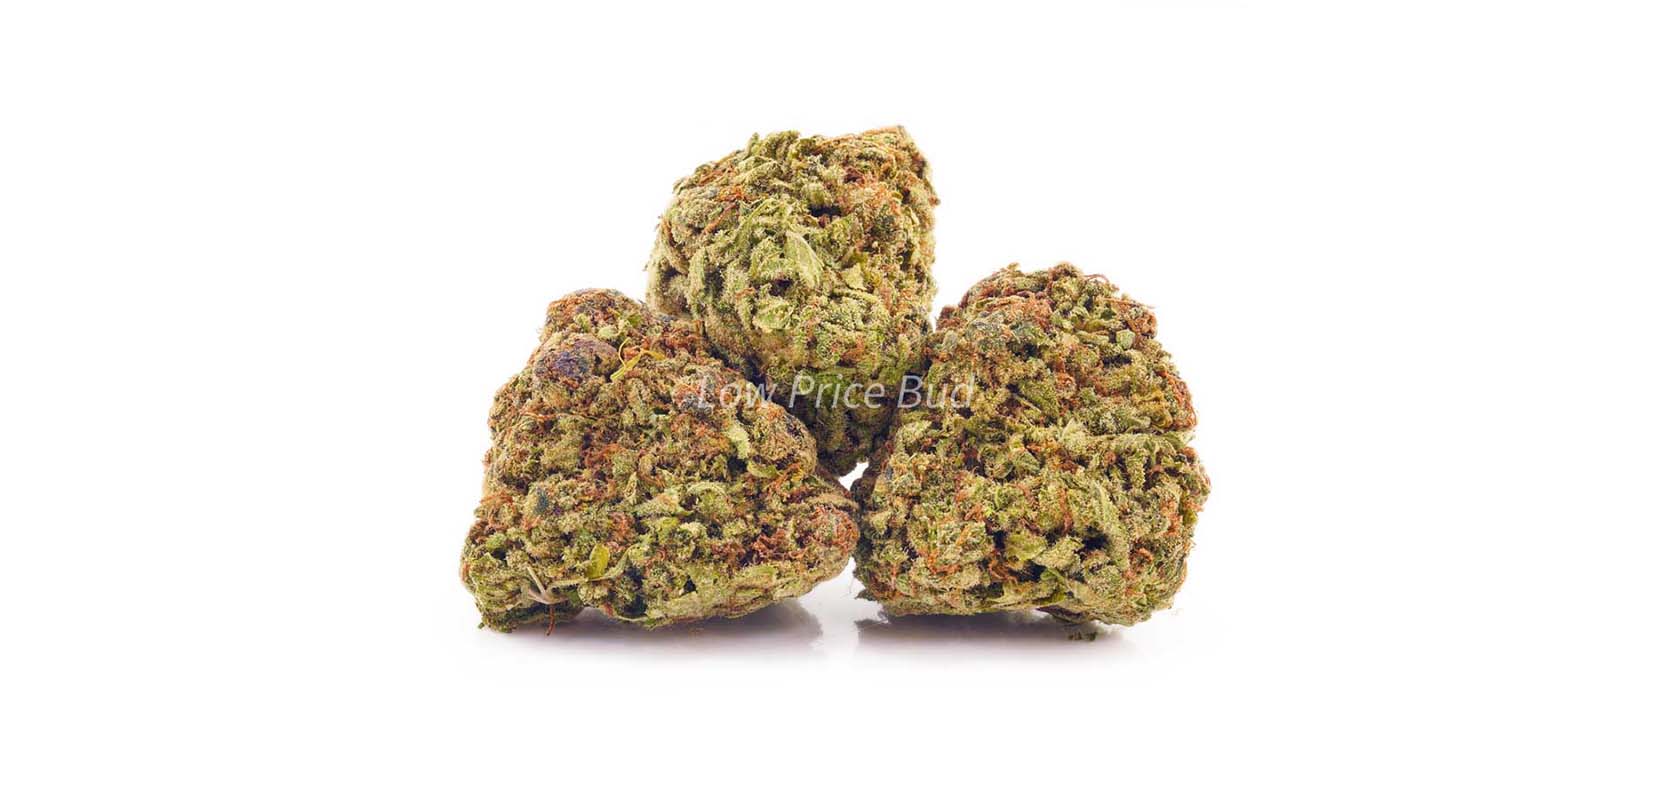 Amnesia Haze value buds and cheap canna. Buy weed online at Low Price Bud online dispensary and mail order marijuana weed store. 